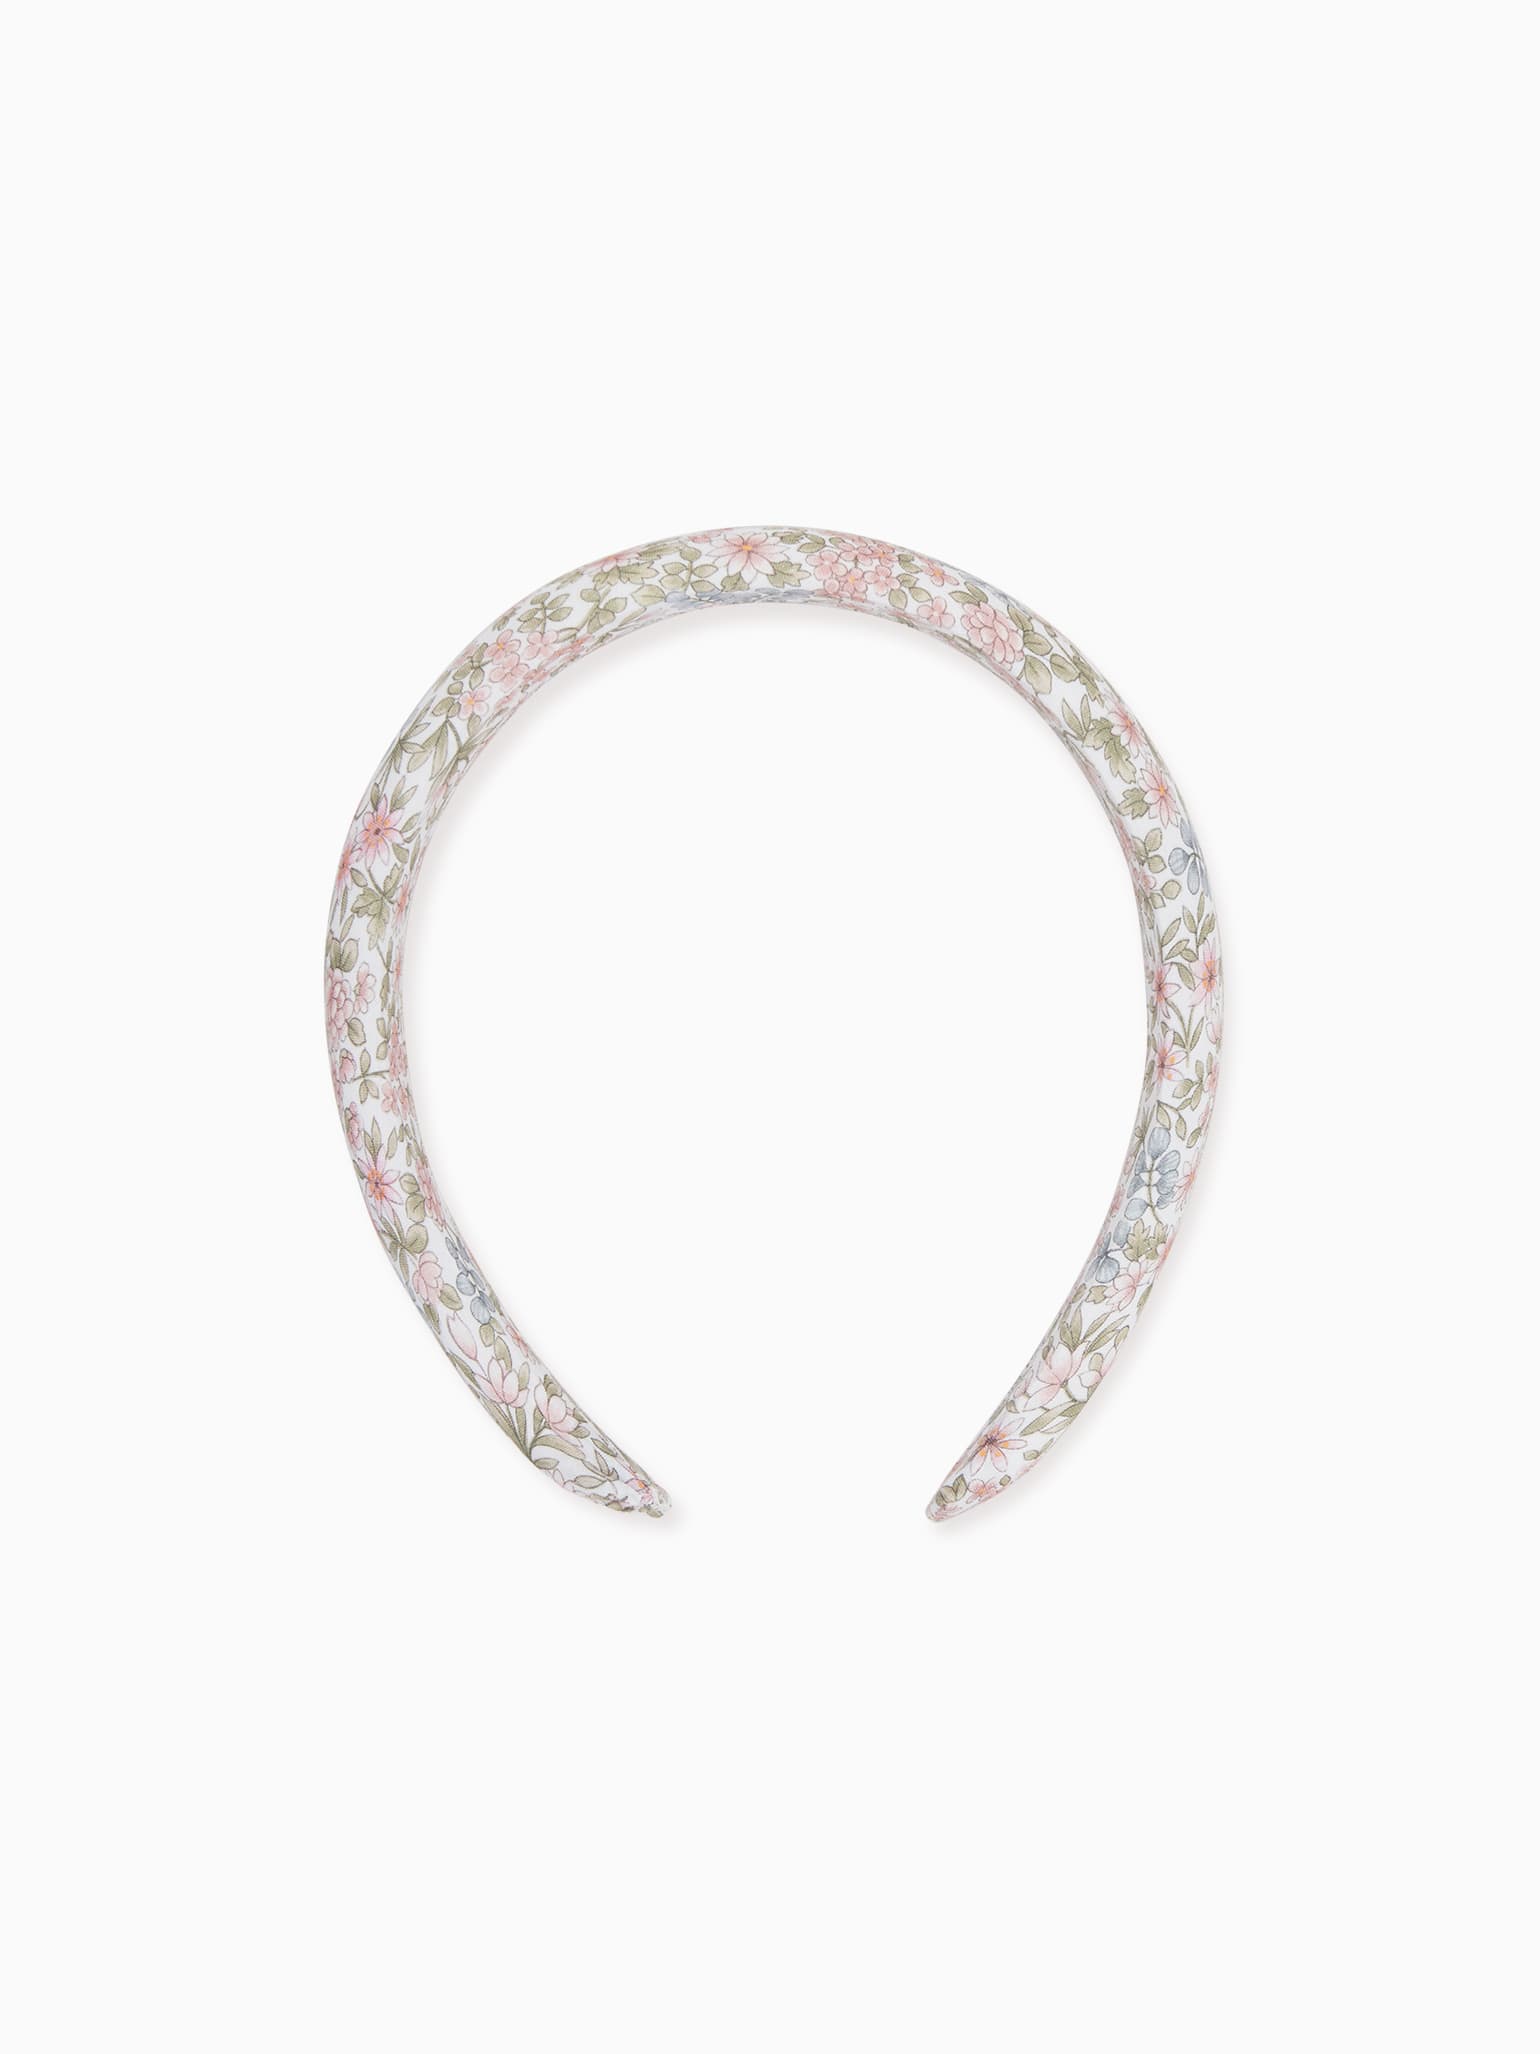 Pink Floral Wide Girl Headband